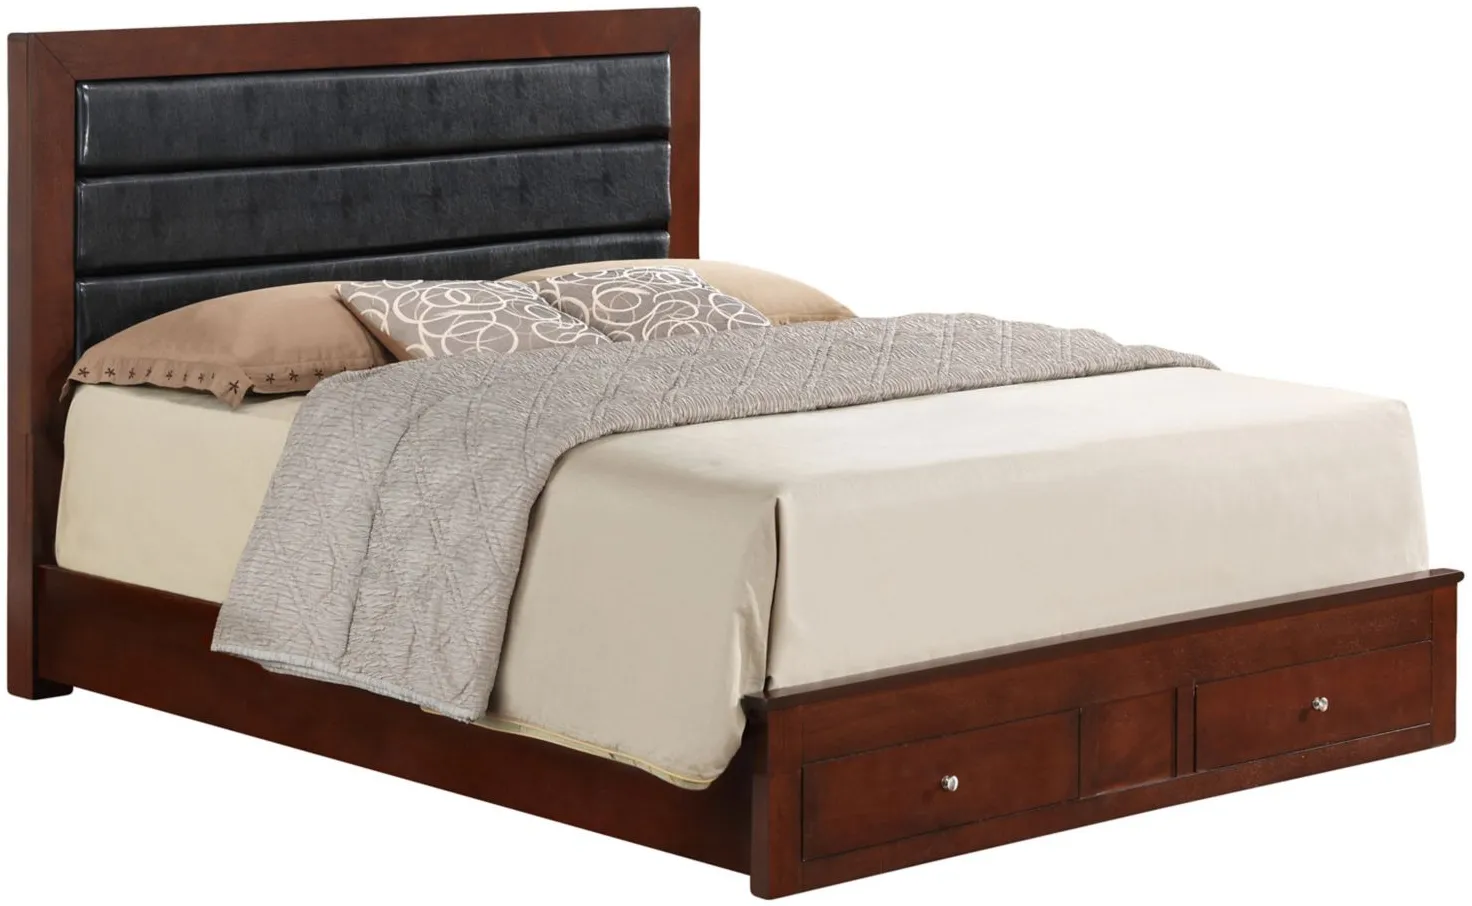 Burlington Full Storage Bed in Cherry by Glory Furniture